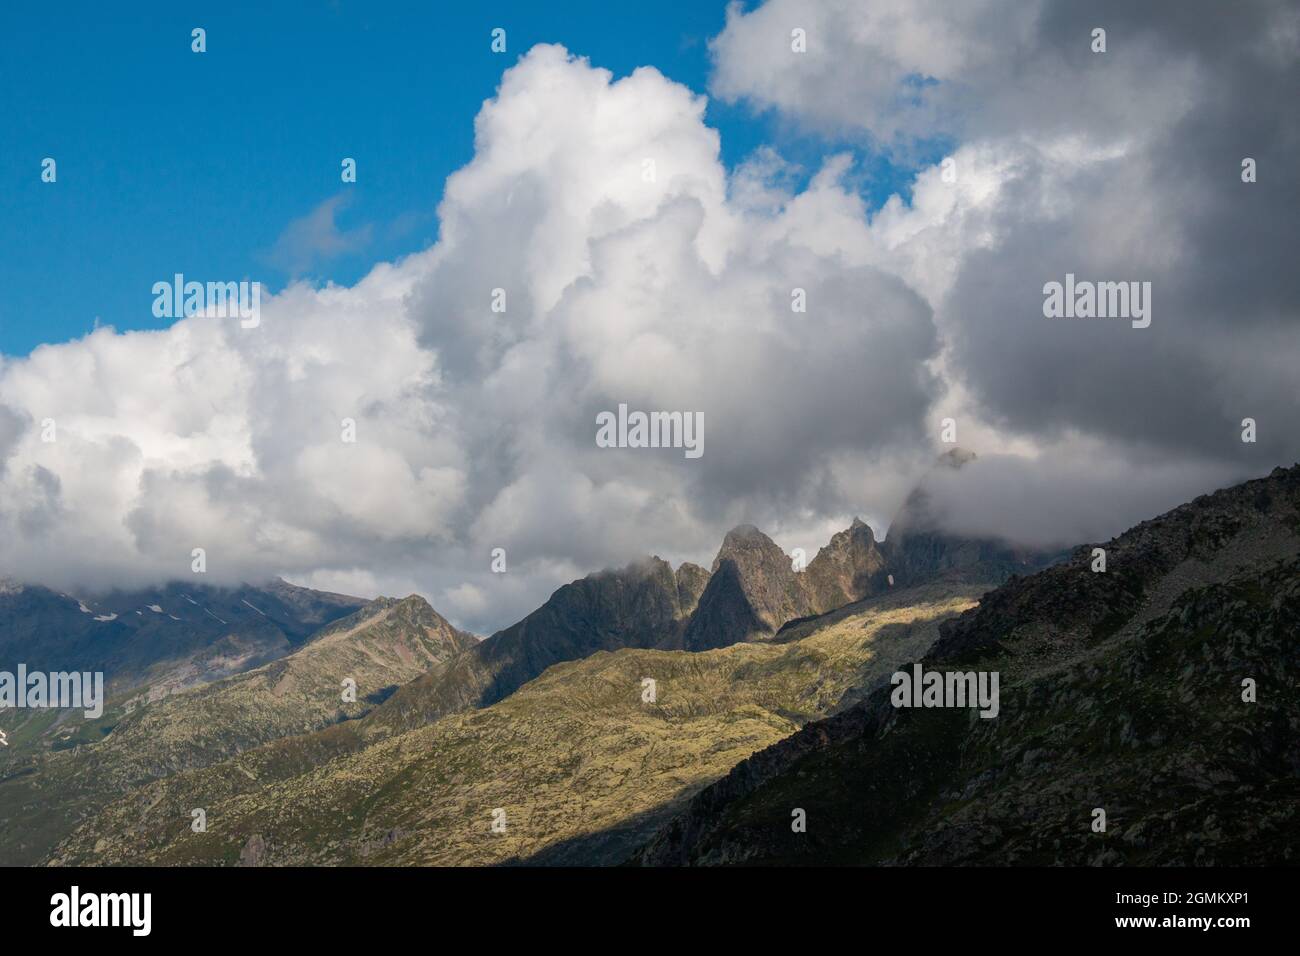 French Alps, a view from the hiking trail between Refuge de Bellachat and Aiguillette des Houches (near Chamonix and Les Houches), September 2021. Stock Photo